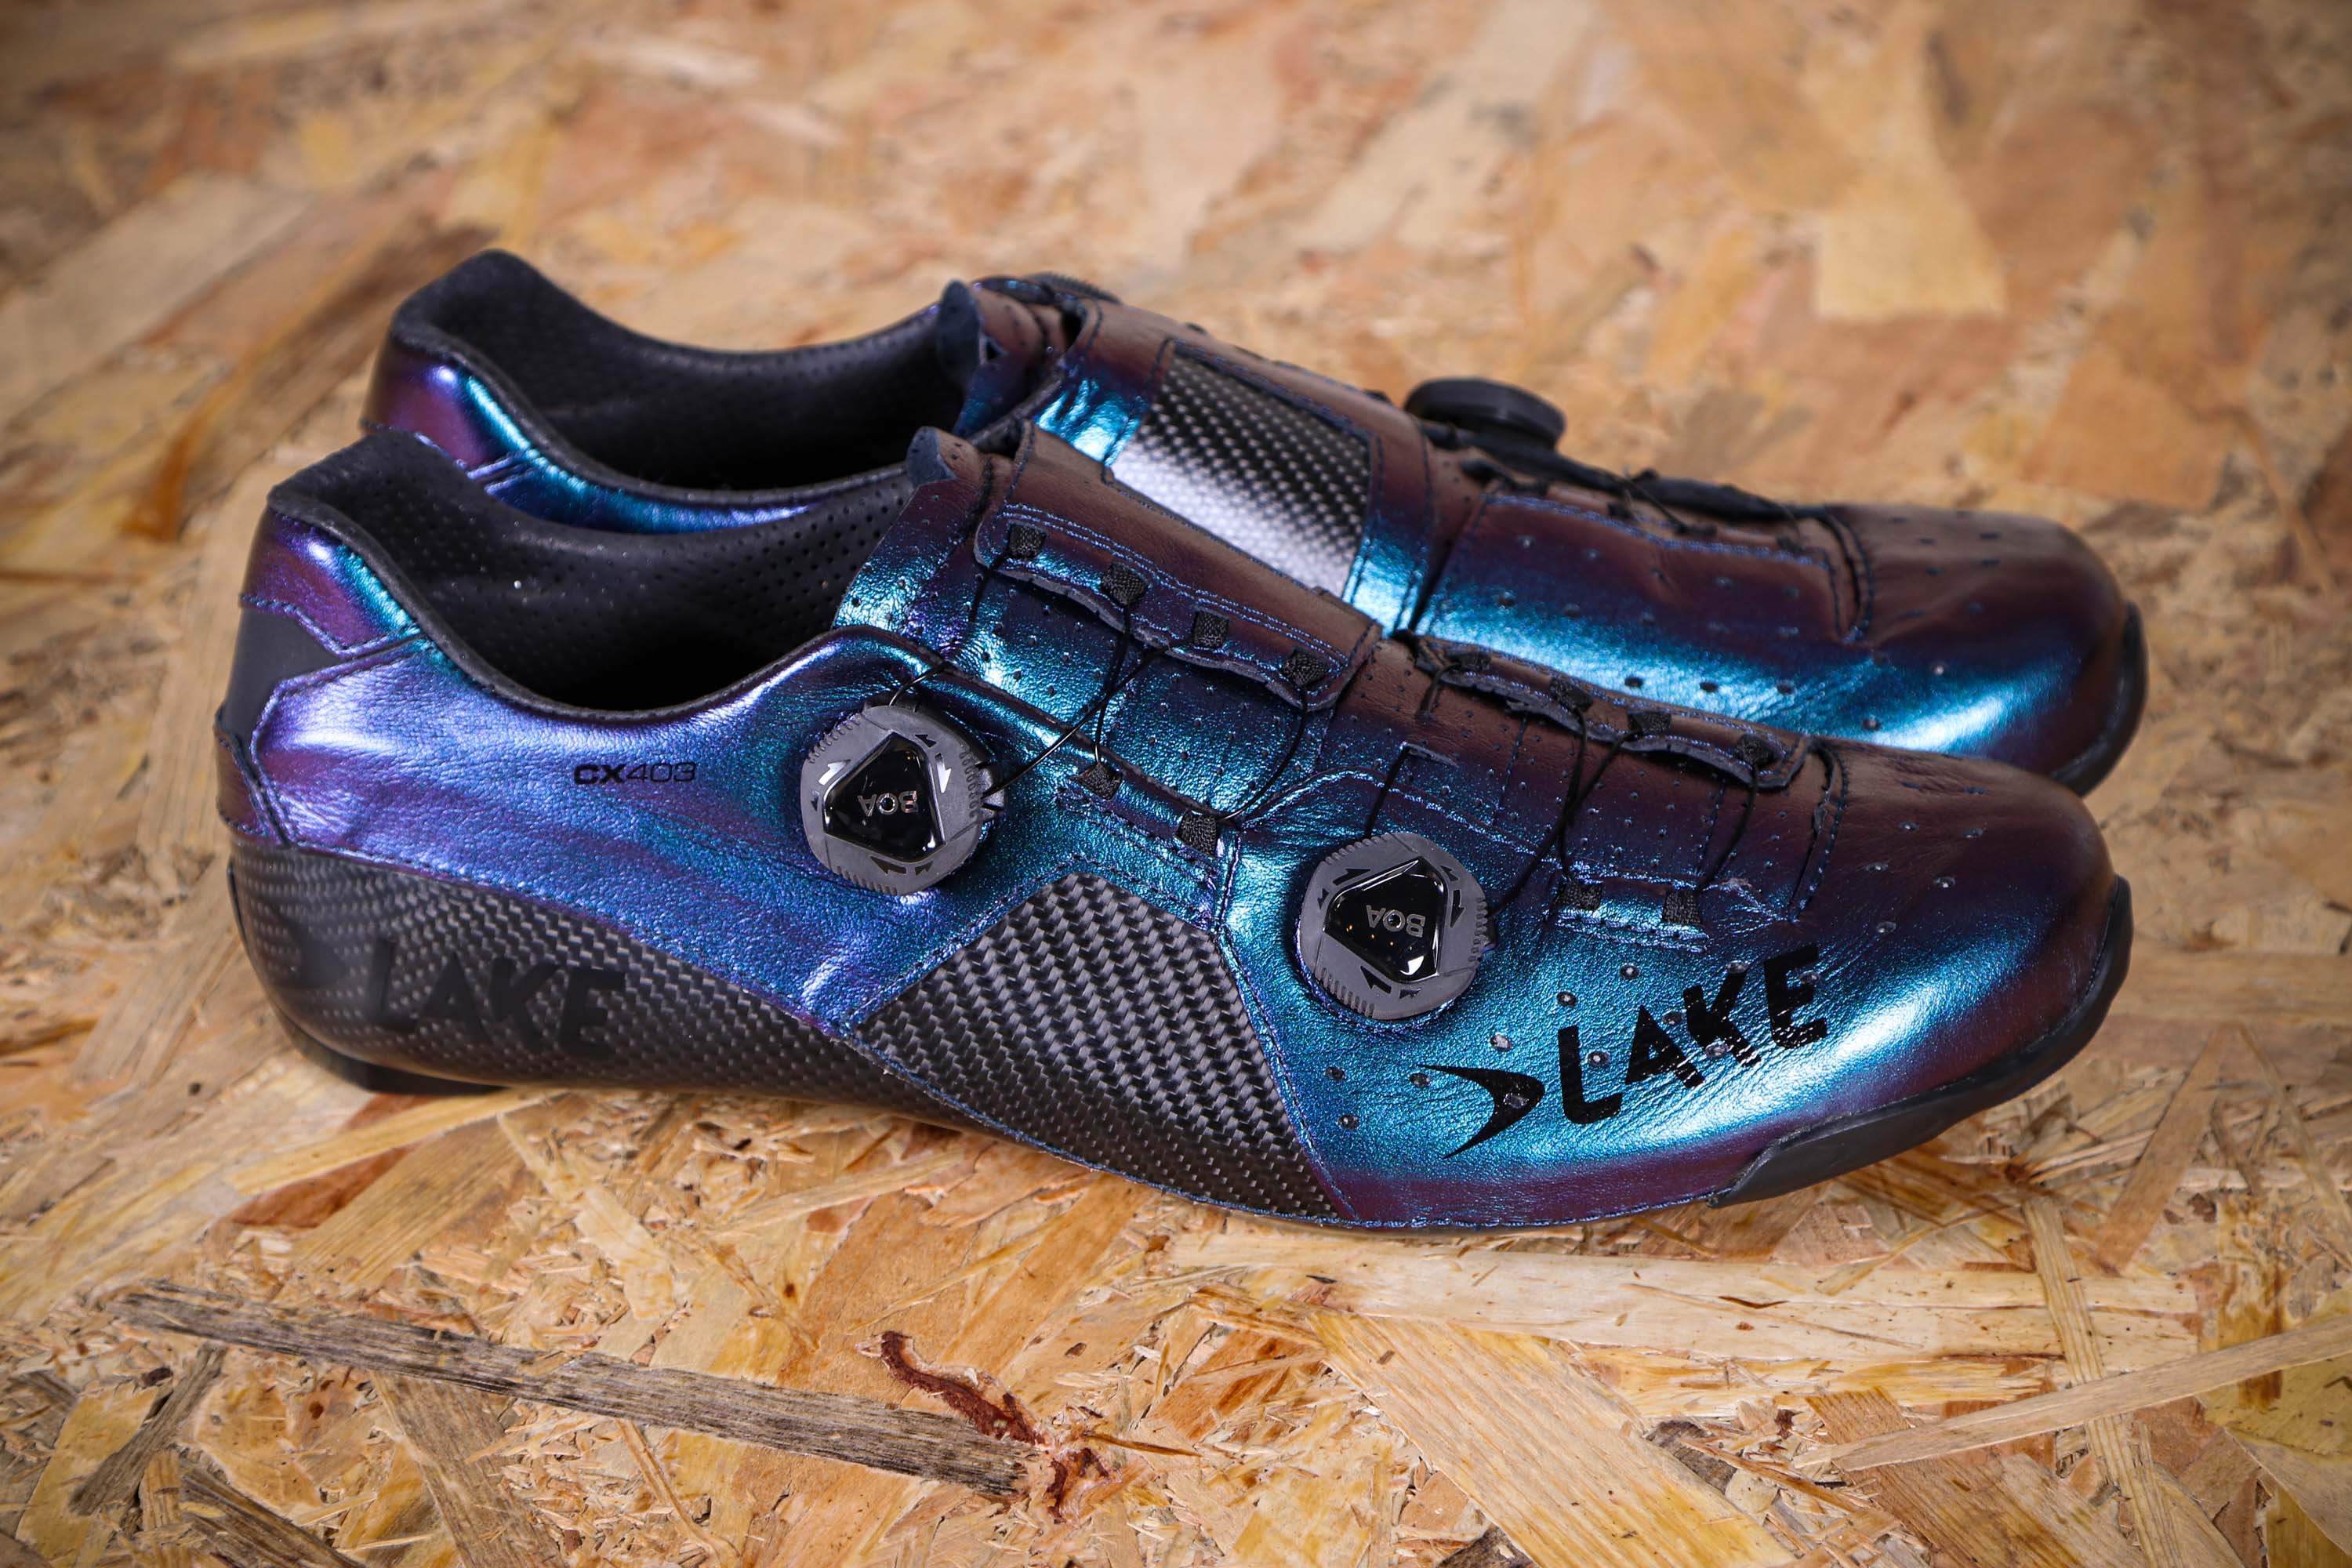 All Sizes Lake CX403 CFC Carbon Road Shoe in Chameleon Blue 